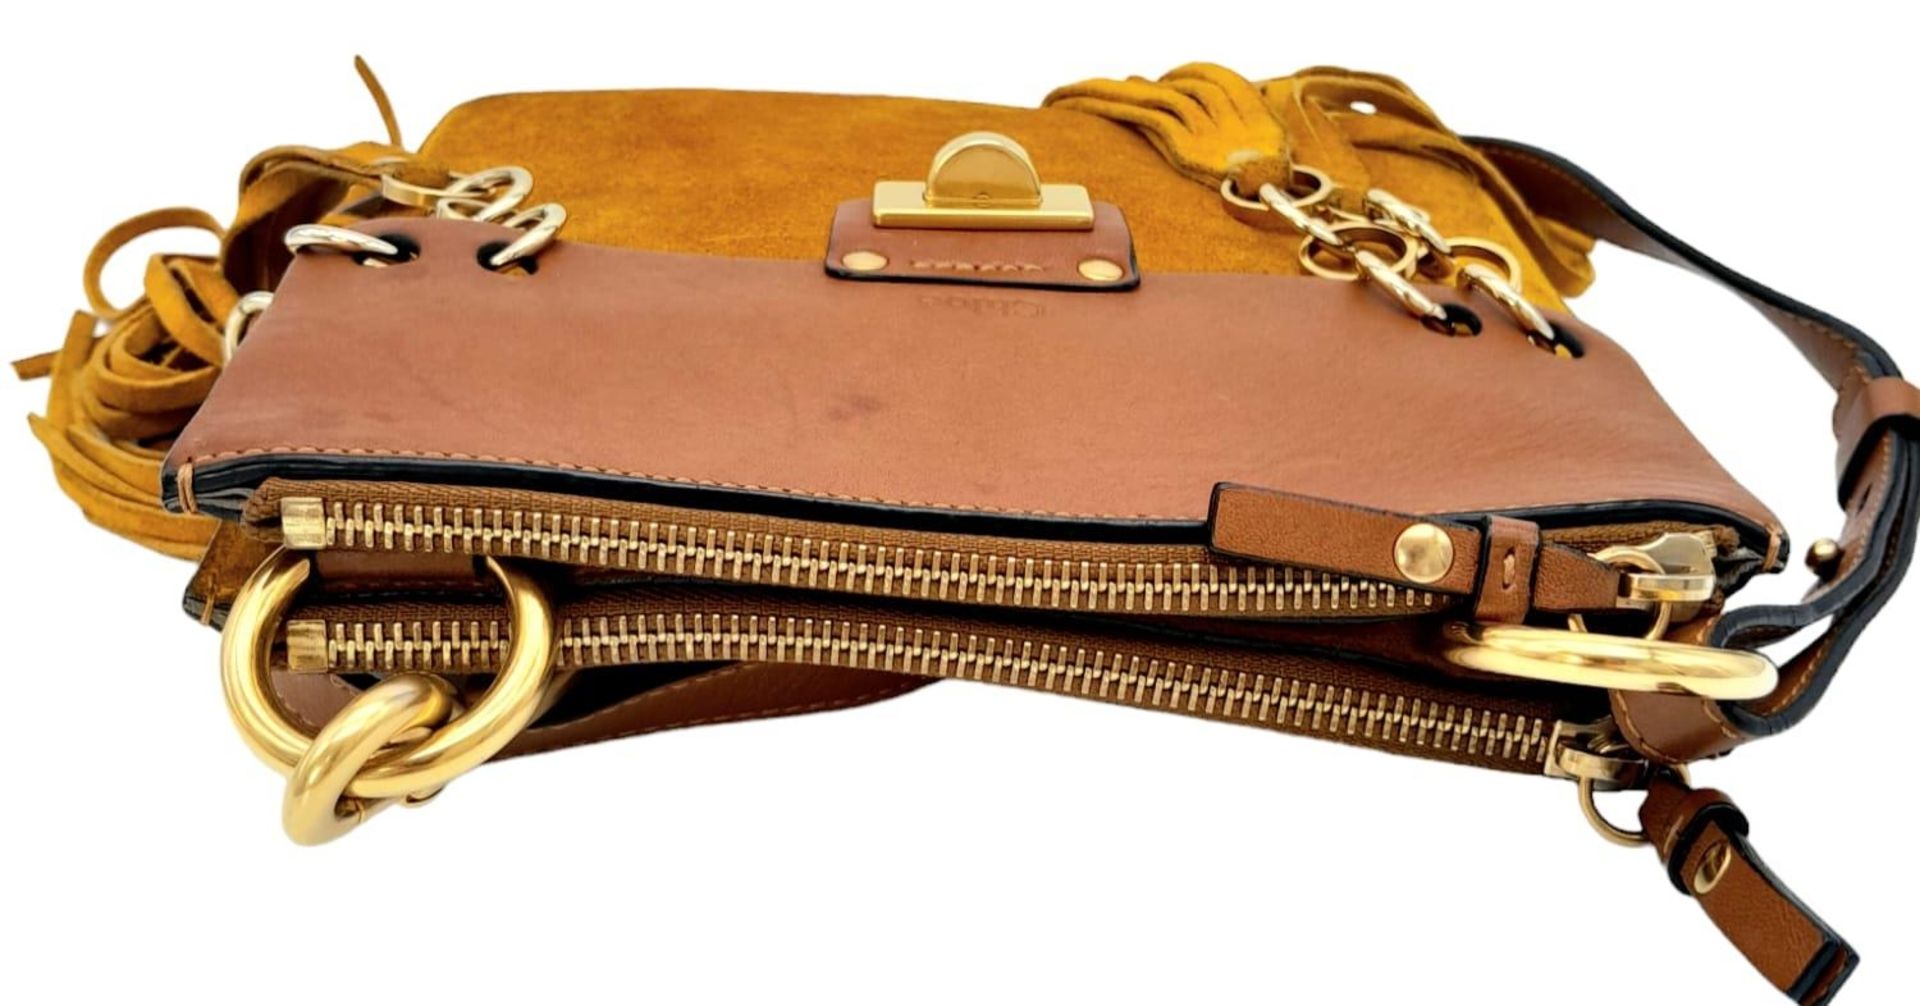 A Chloe Brown and Mustard 'Jane' Shoulder Bag. Leather and suede exterior with gold-toned - Image 4 of 8